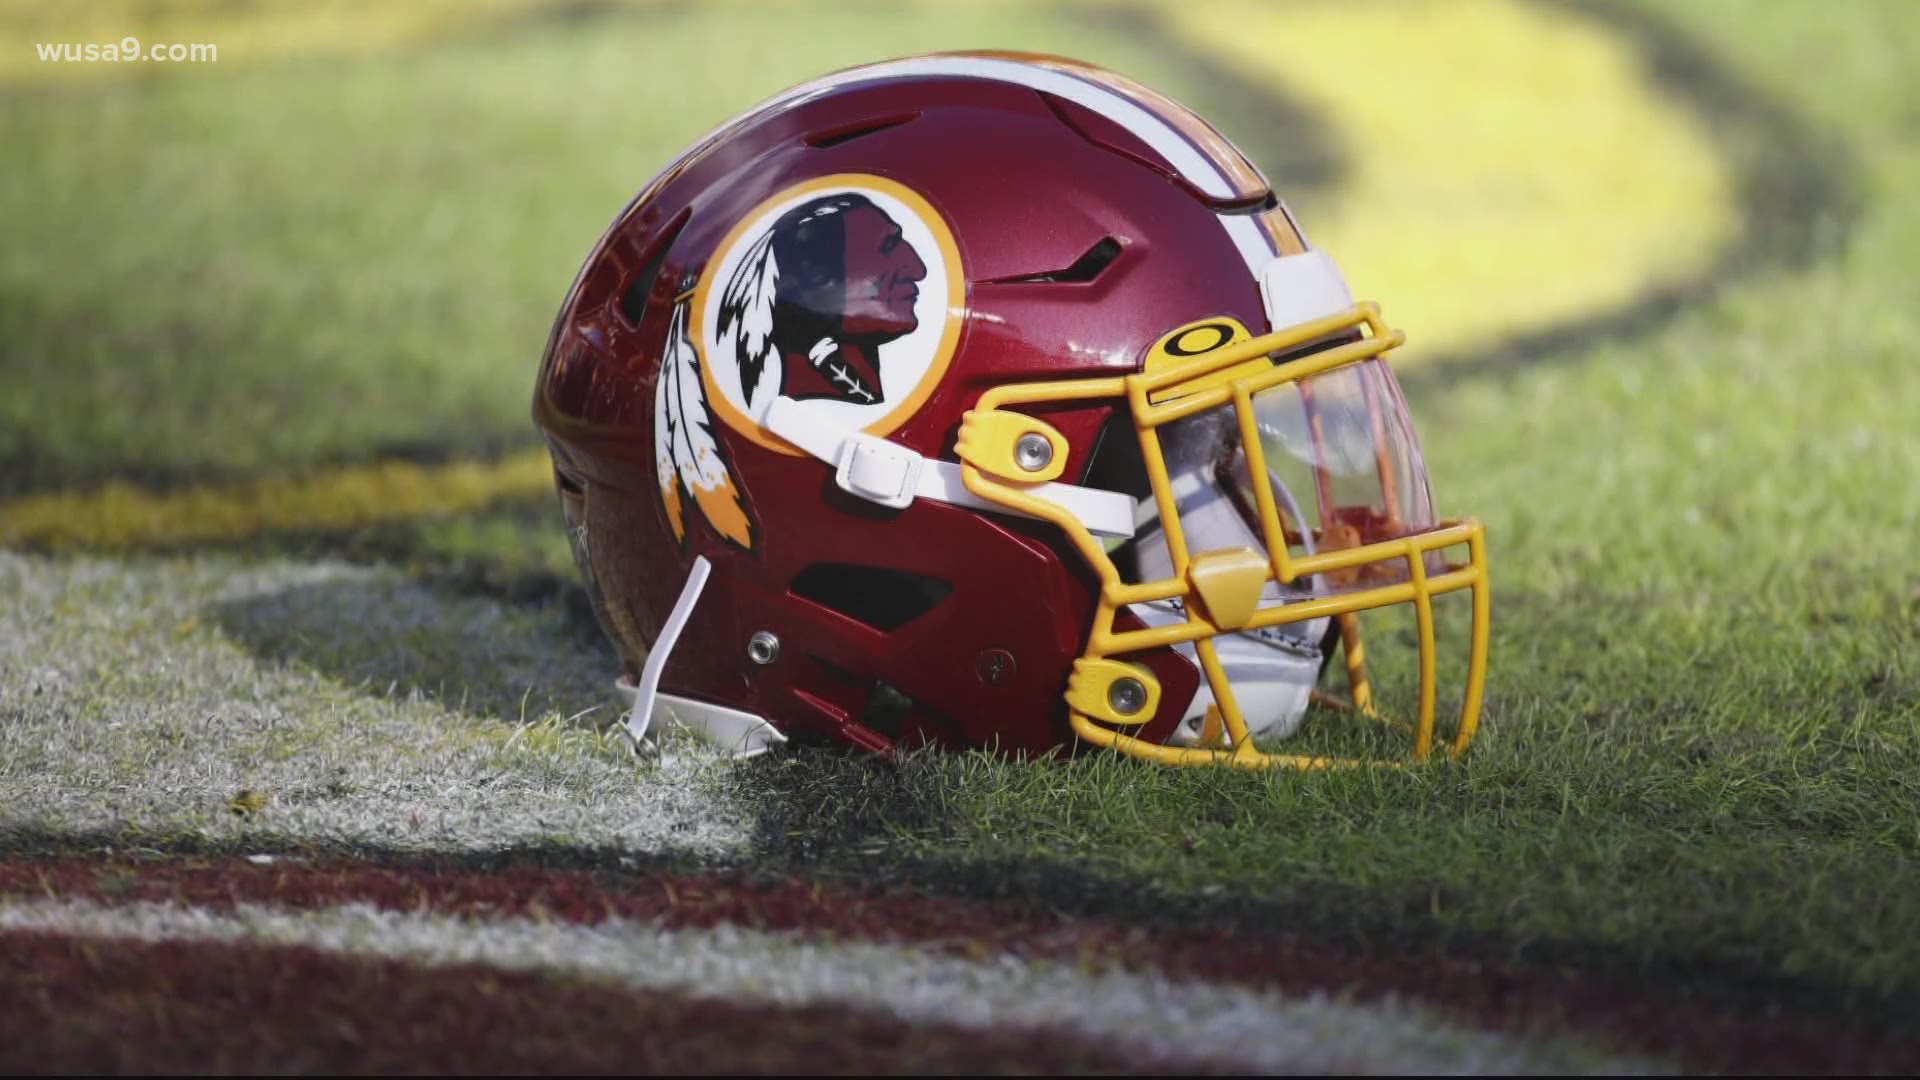 Reporter Sharla McBride chats with Larry about the significance and impact of the Redskins’ announcement about considering a name change